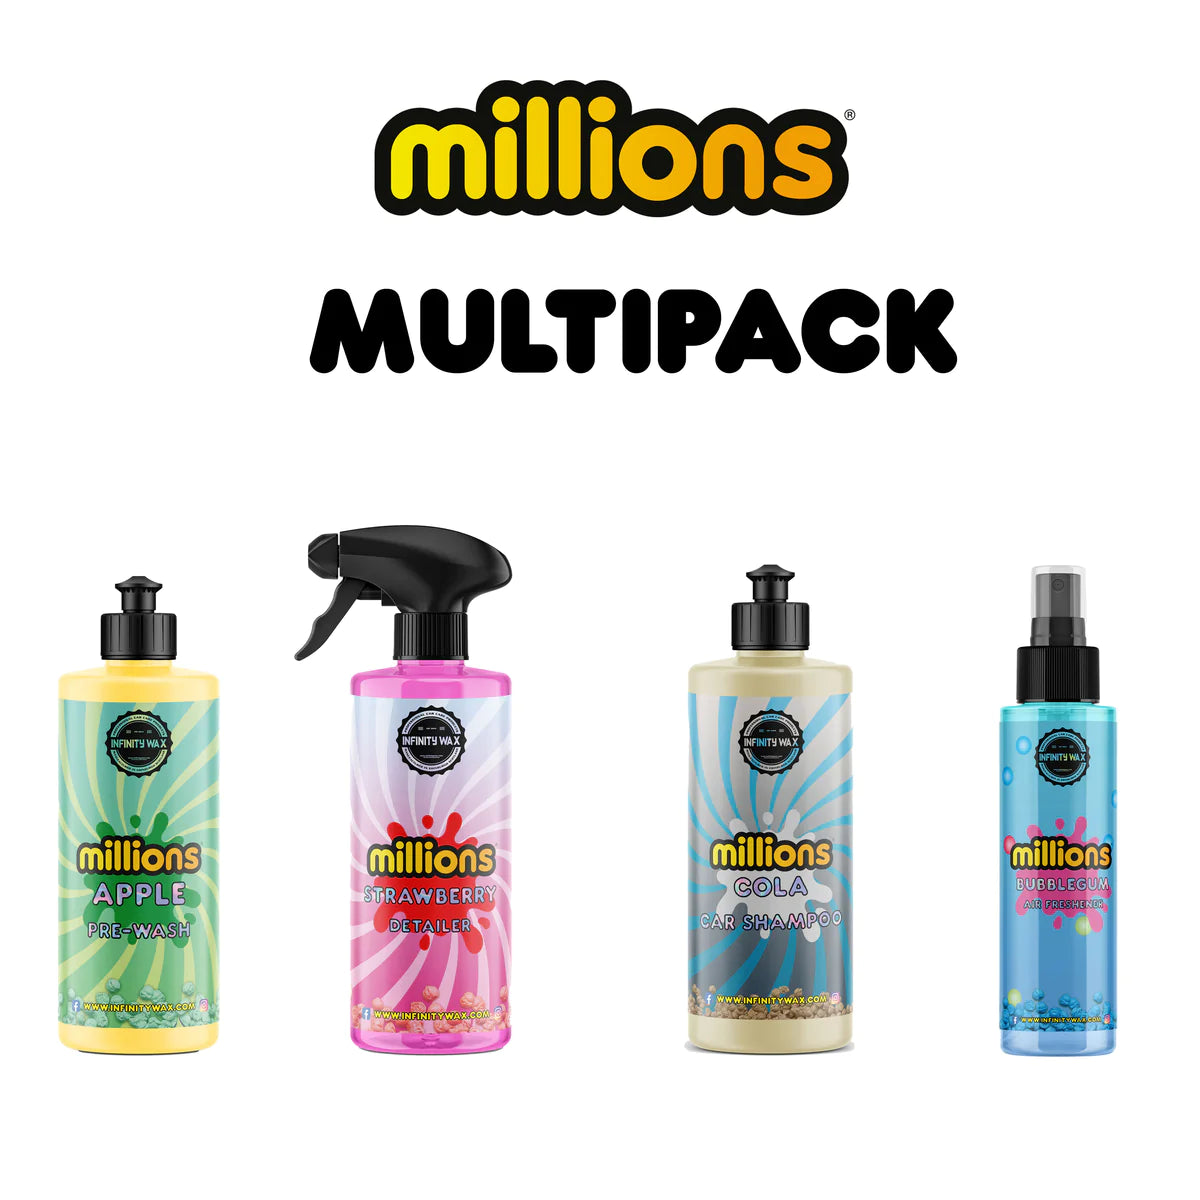 Infinity Wax Millions Multipack